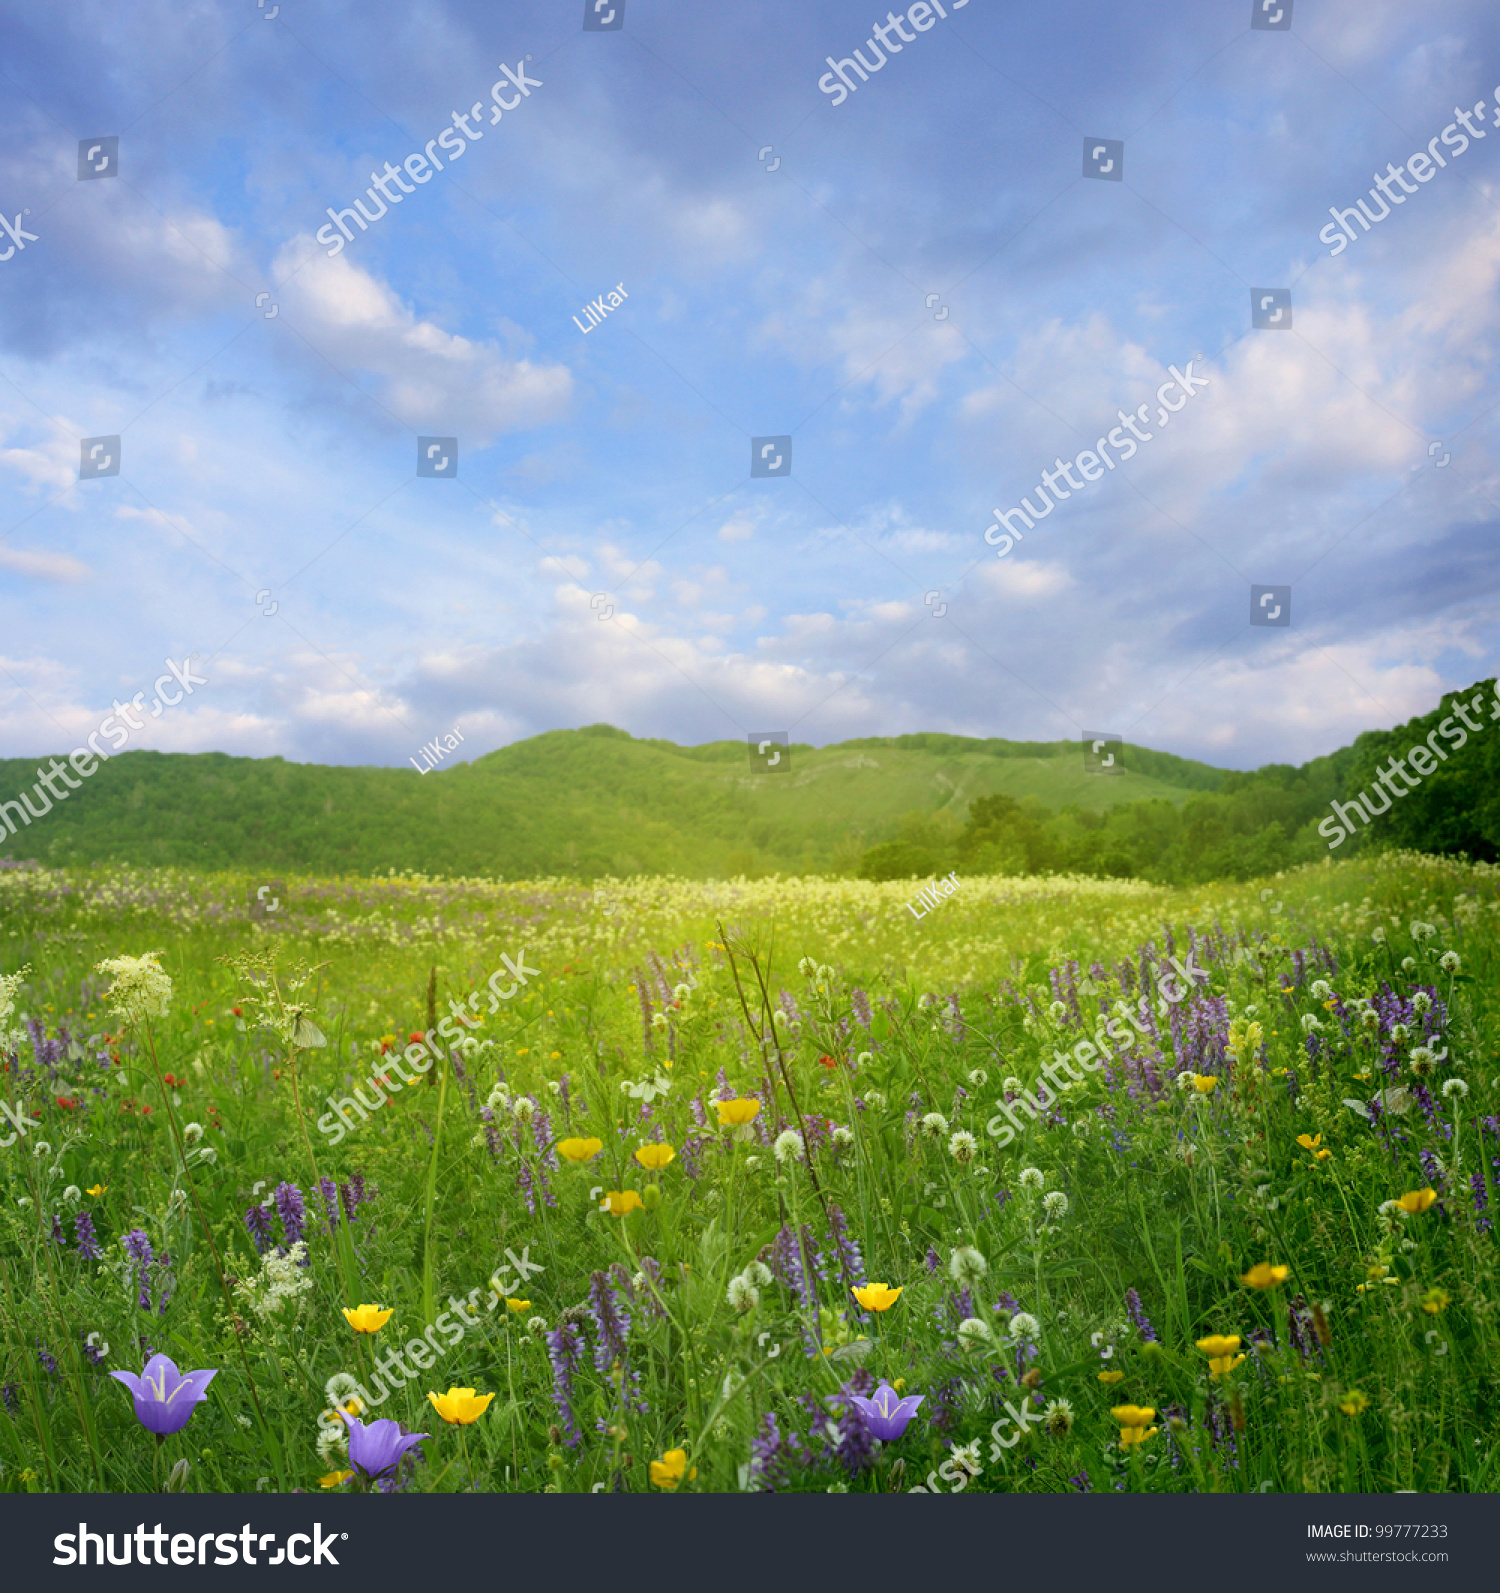 Mountain landscape with flowers #99777233